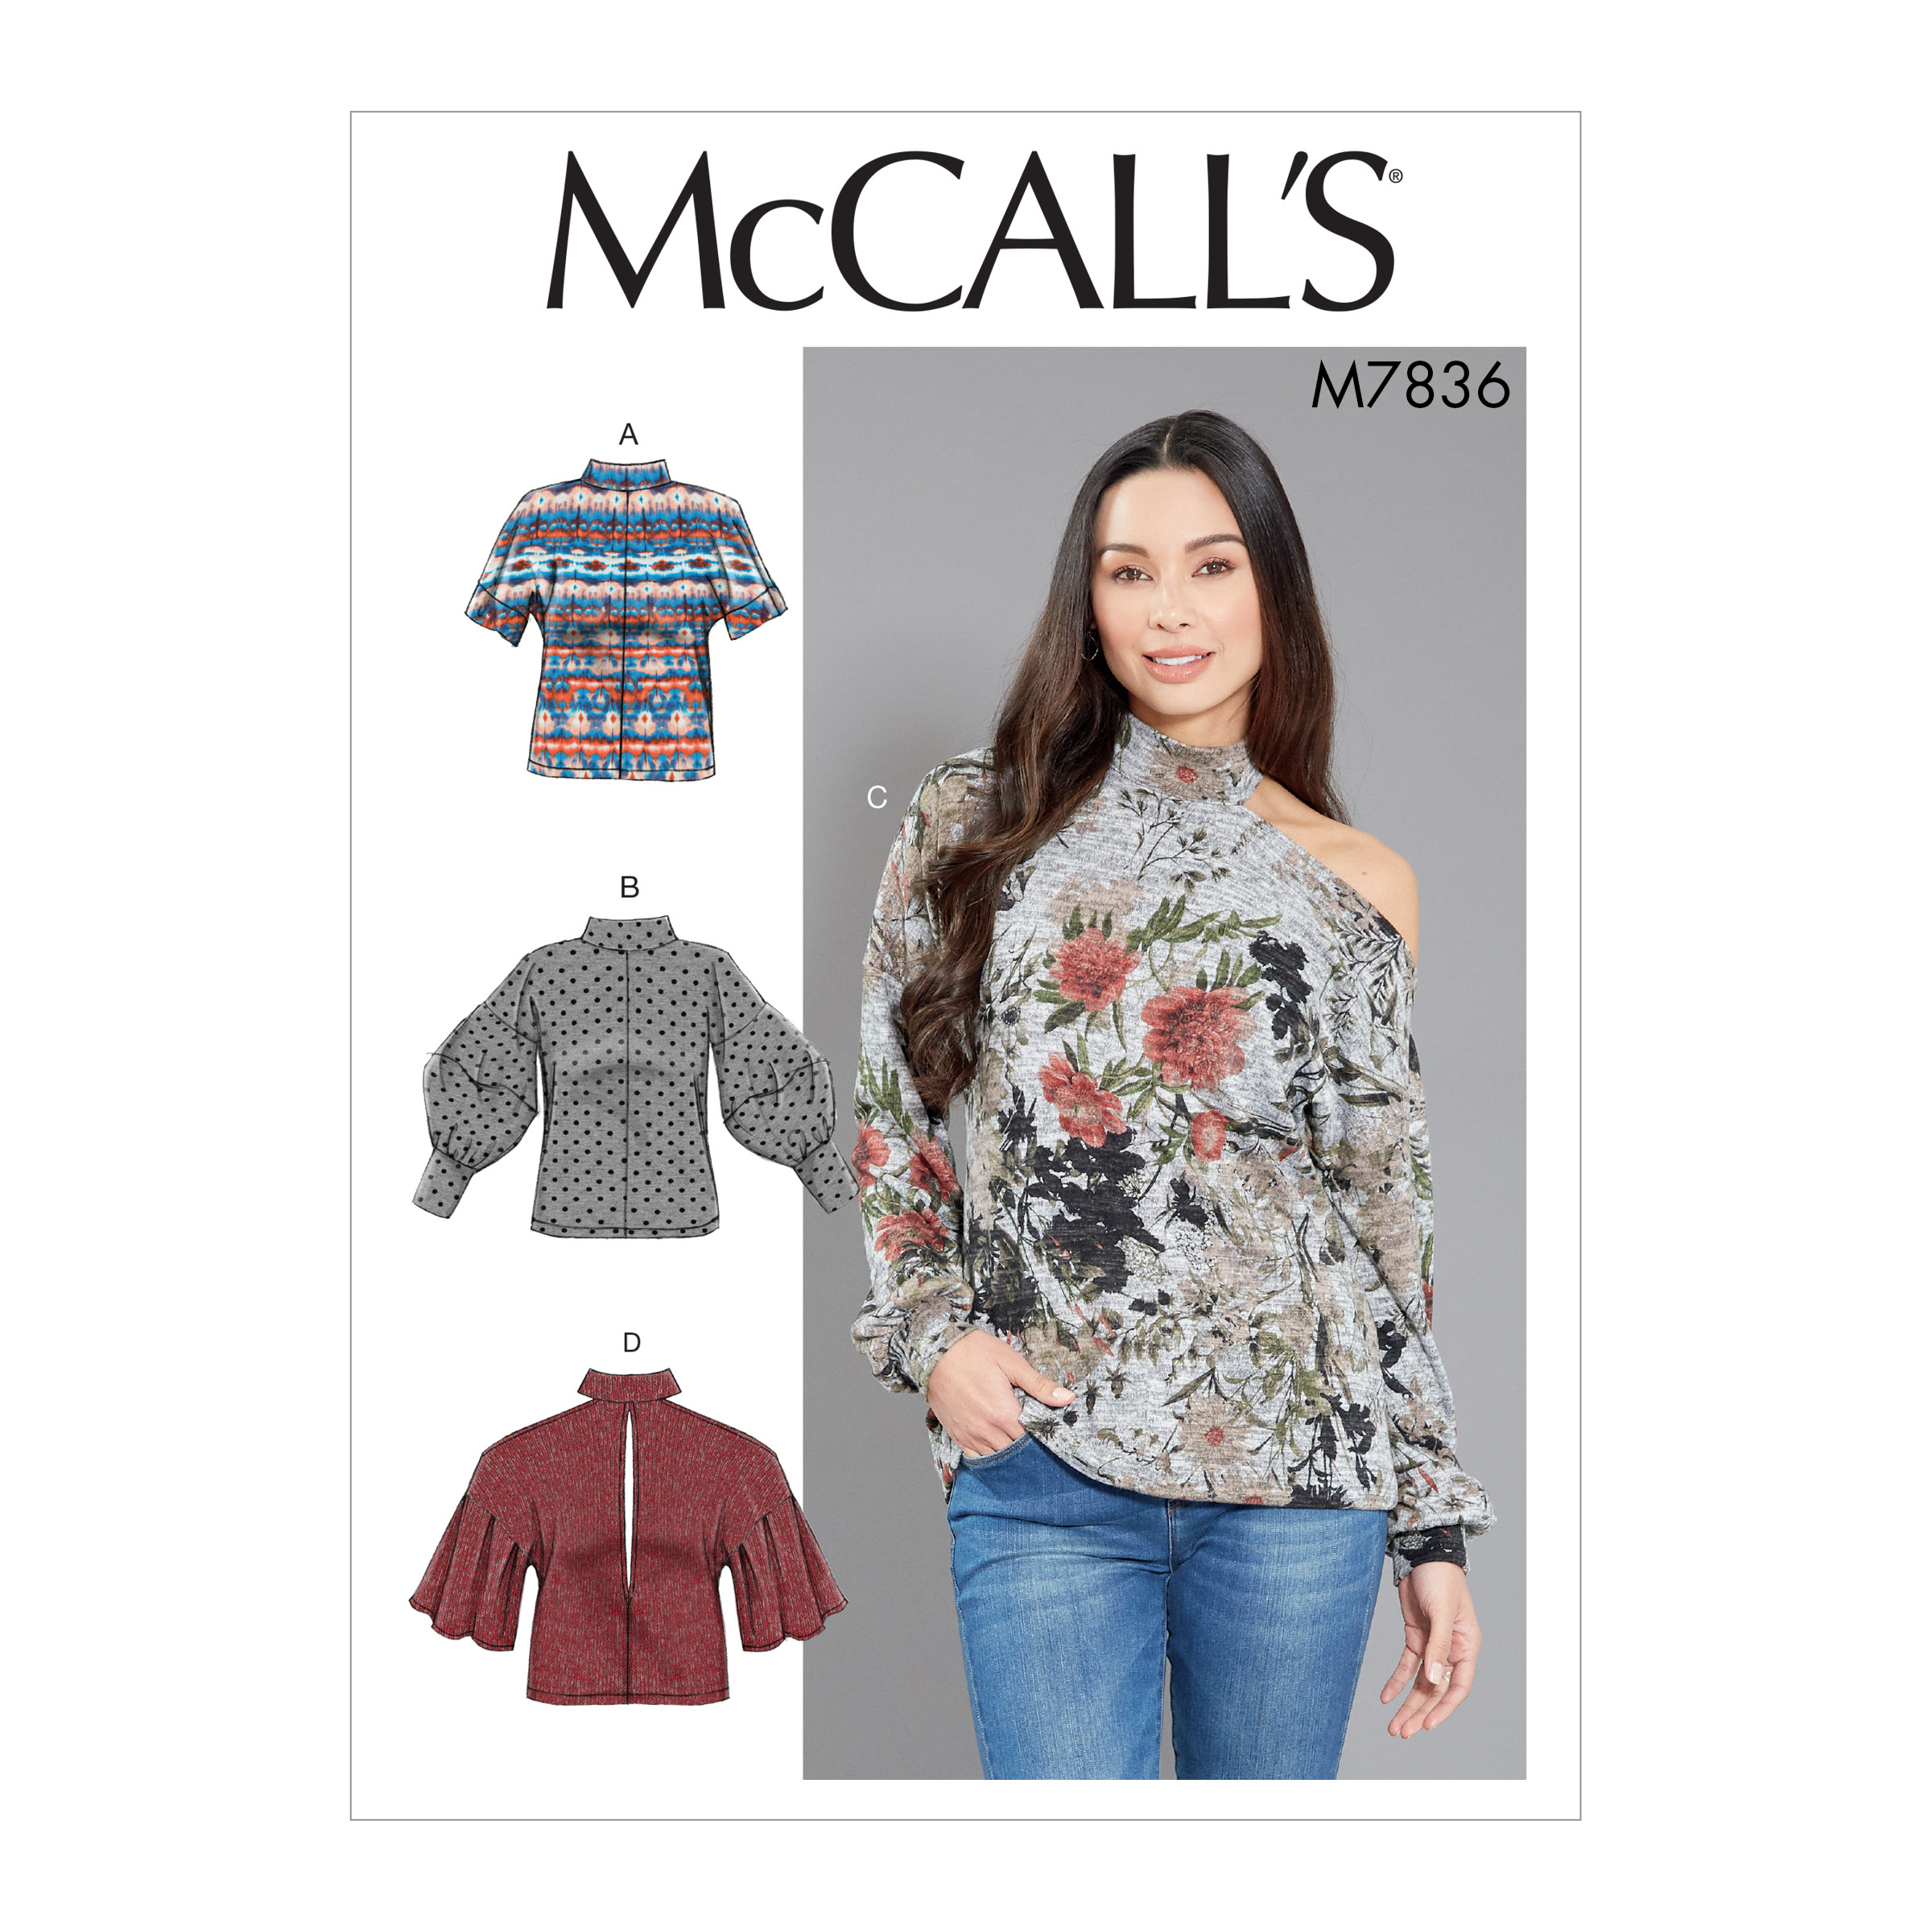 McCall's 7836 Misses' Tops